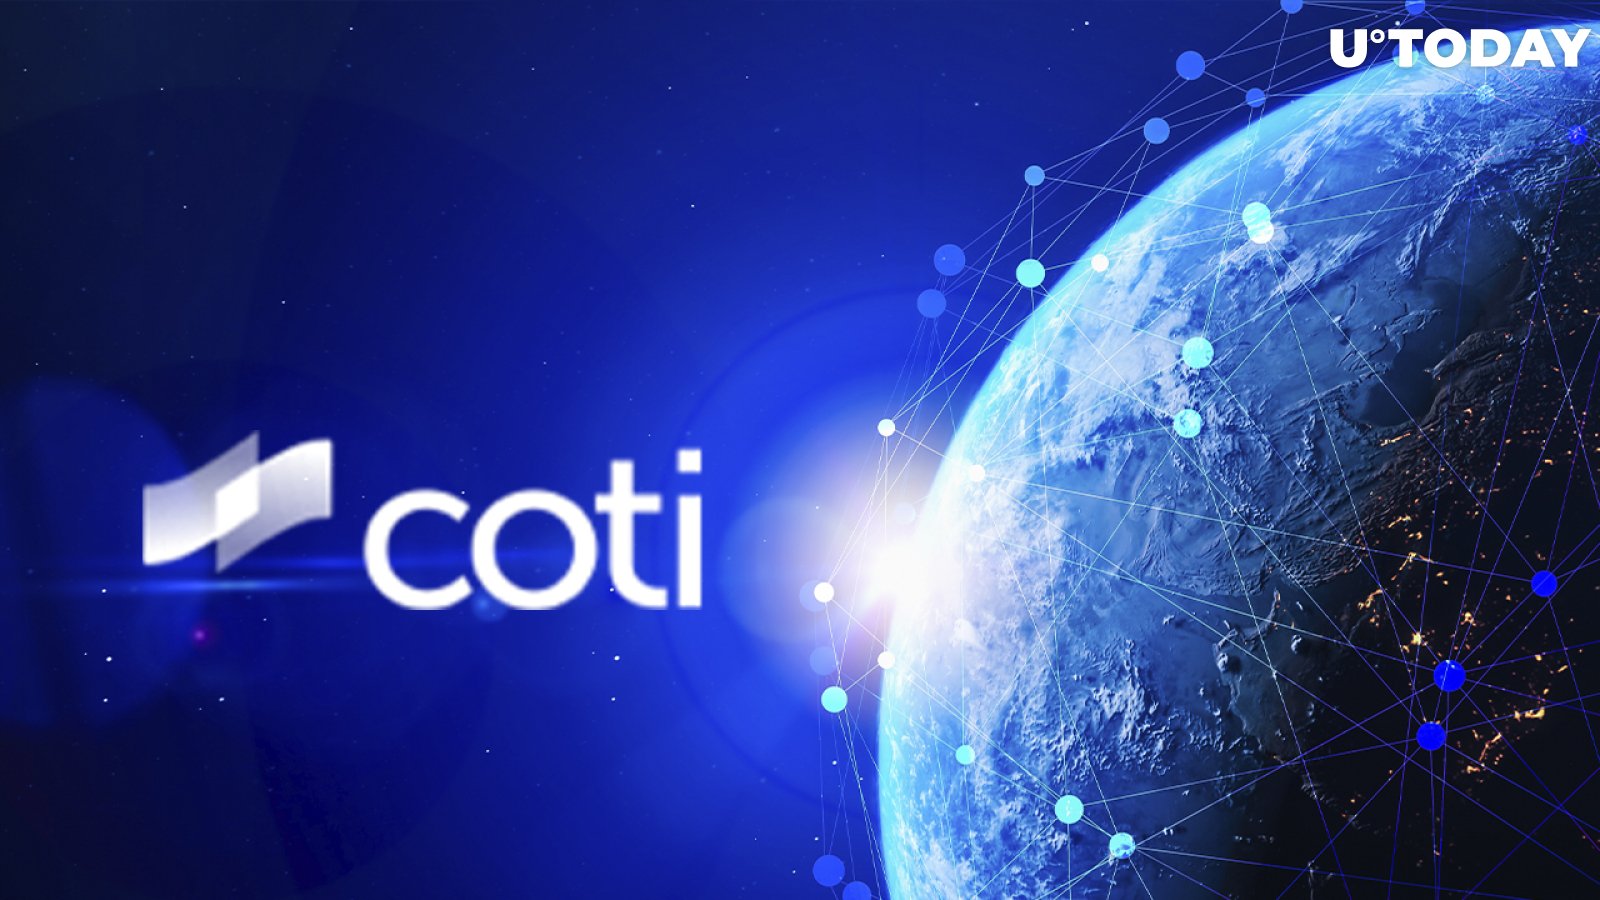 COTI Network Launches COTI Treasury Decentralized Pool: Details